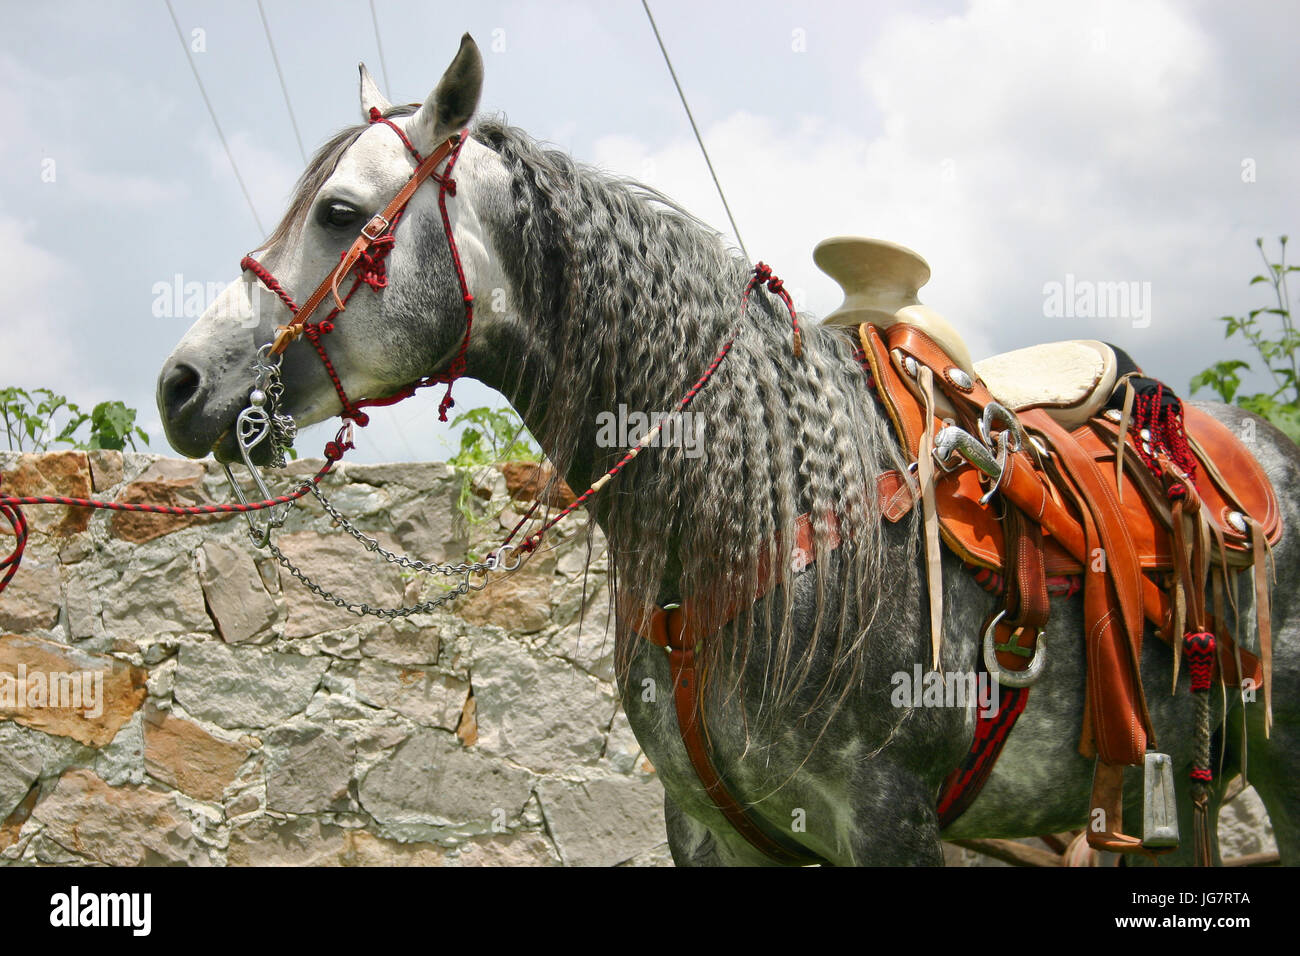 Azteca horse with saddle in Mexico Stock Photo